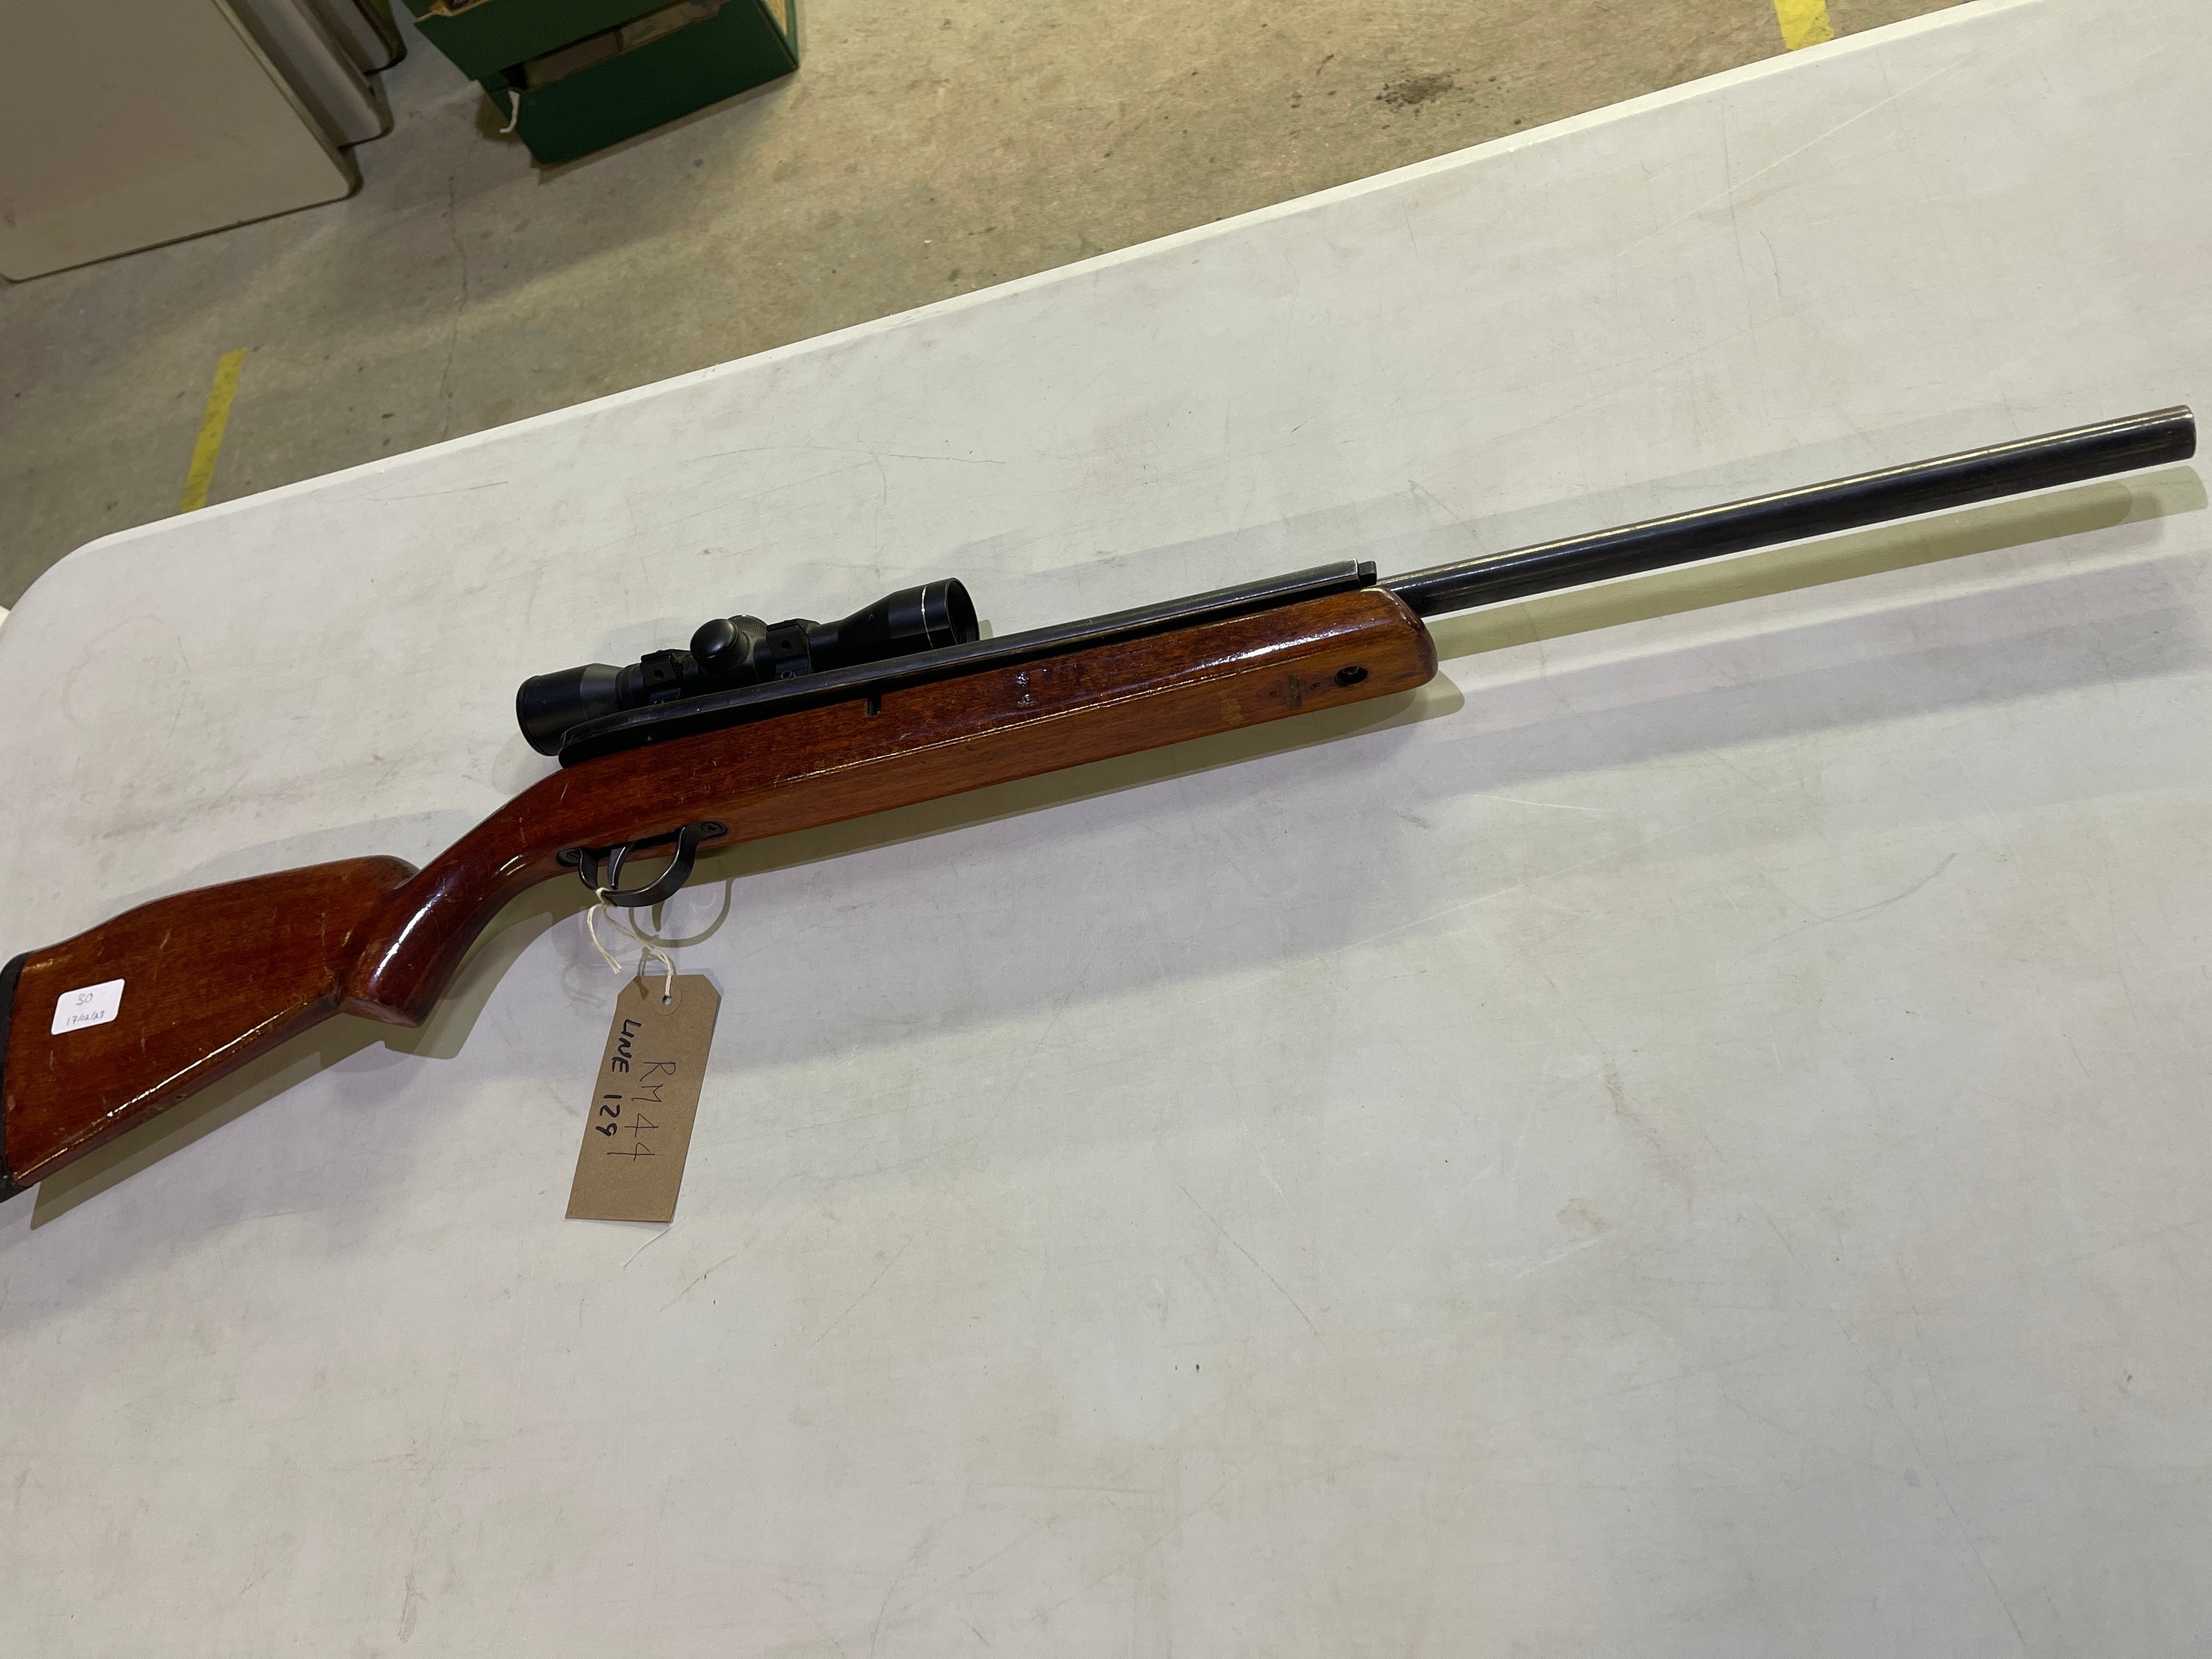 Webley Osprey .177 with Custom Stock - Guns for Sale (Private Sales) -  Pigeon Watch Forums